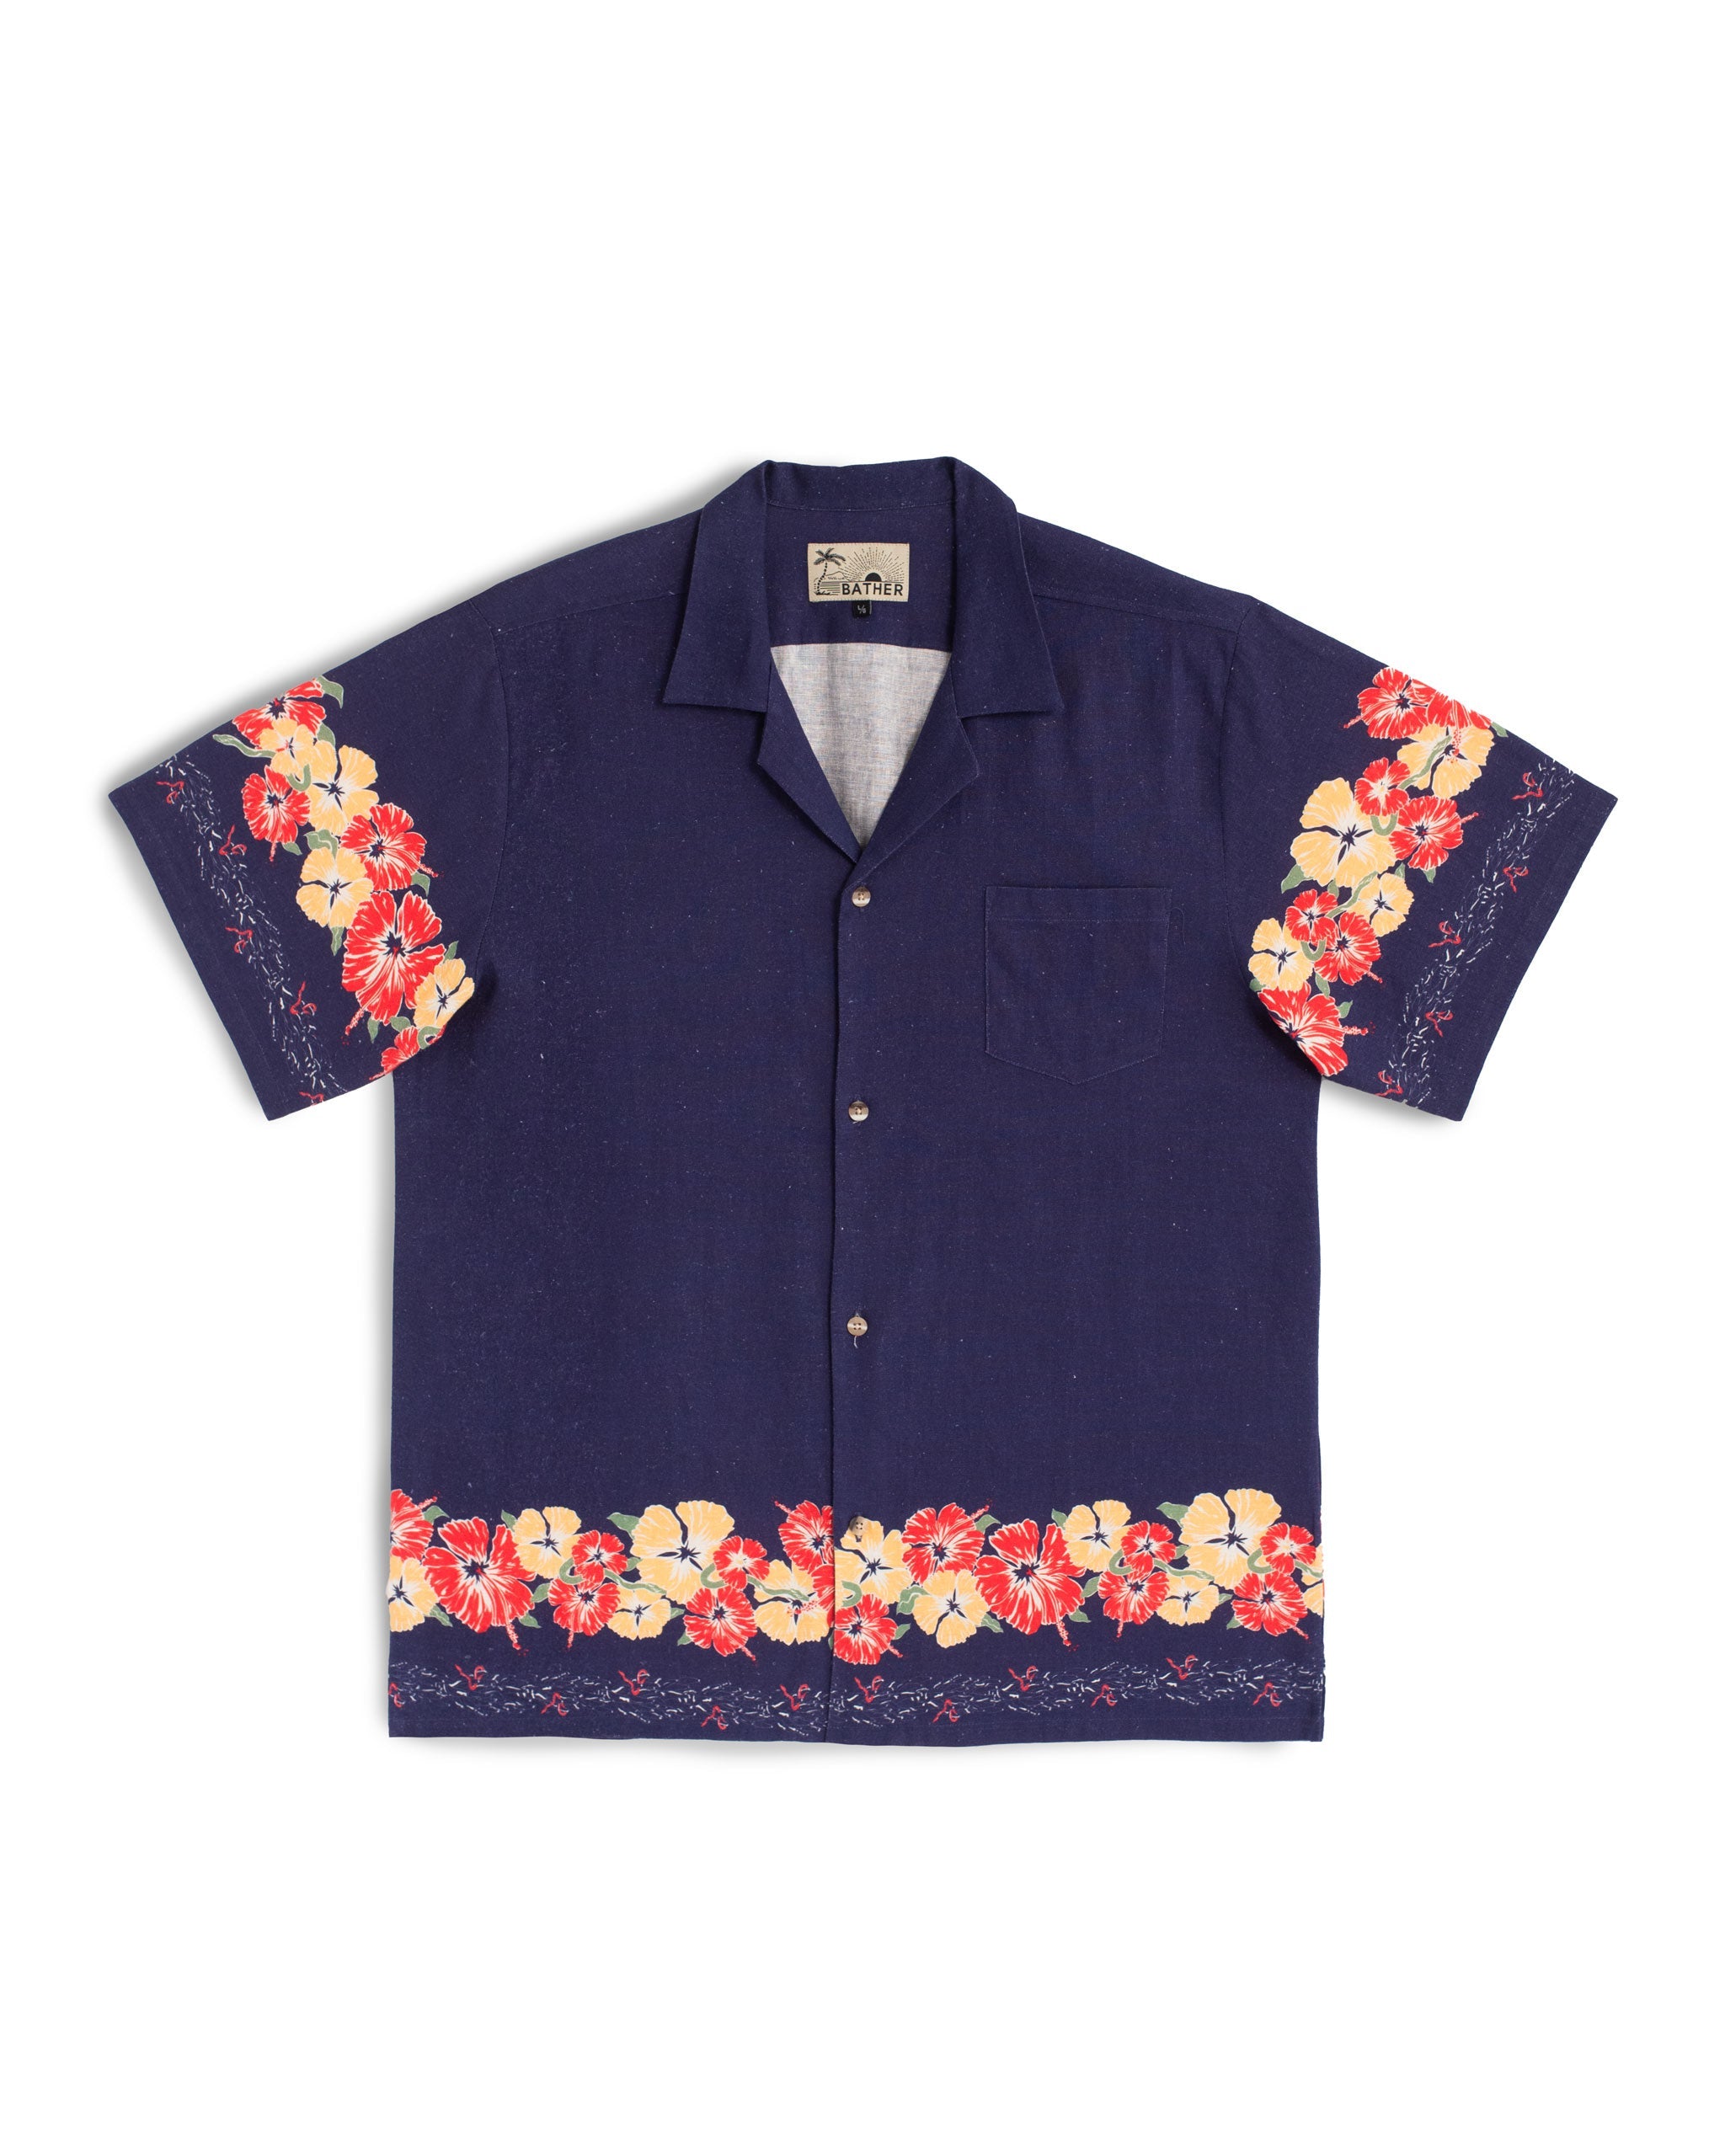 Indigo linen camp shirt with floral pattern on the bottom and the sleeves